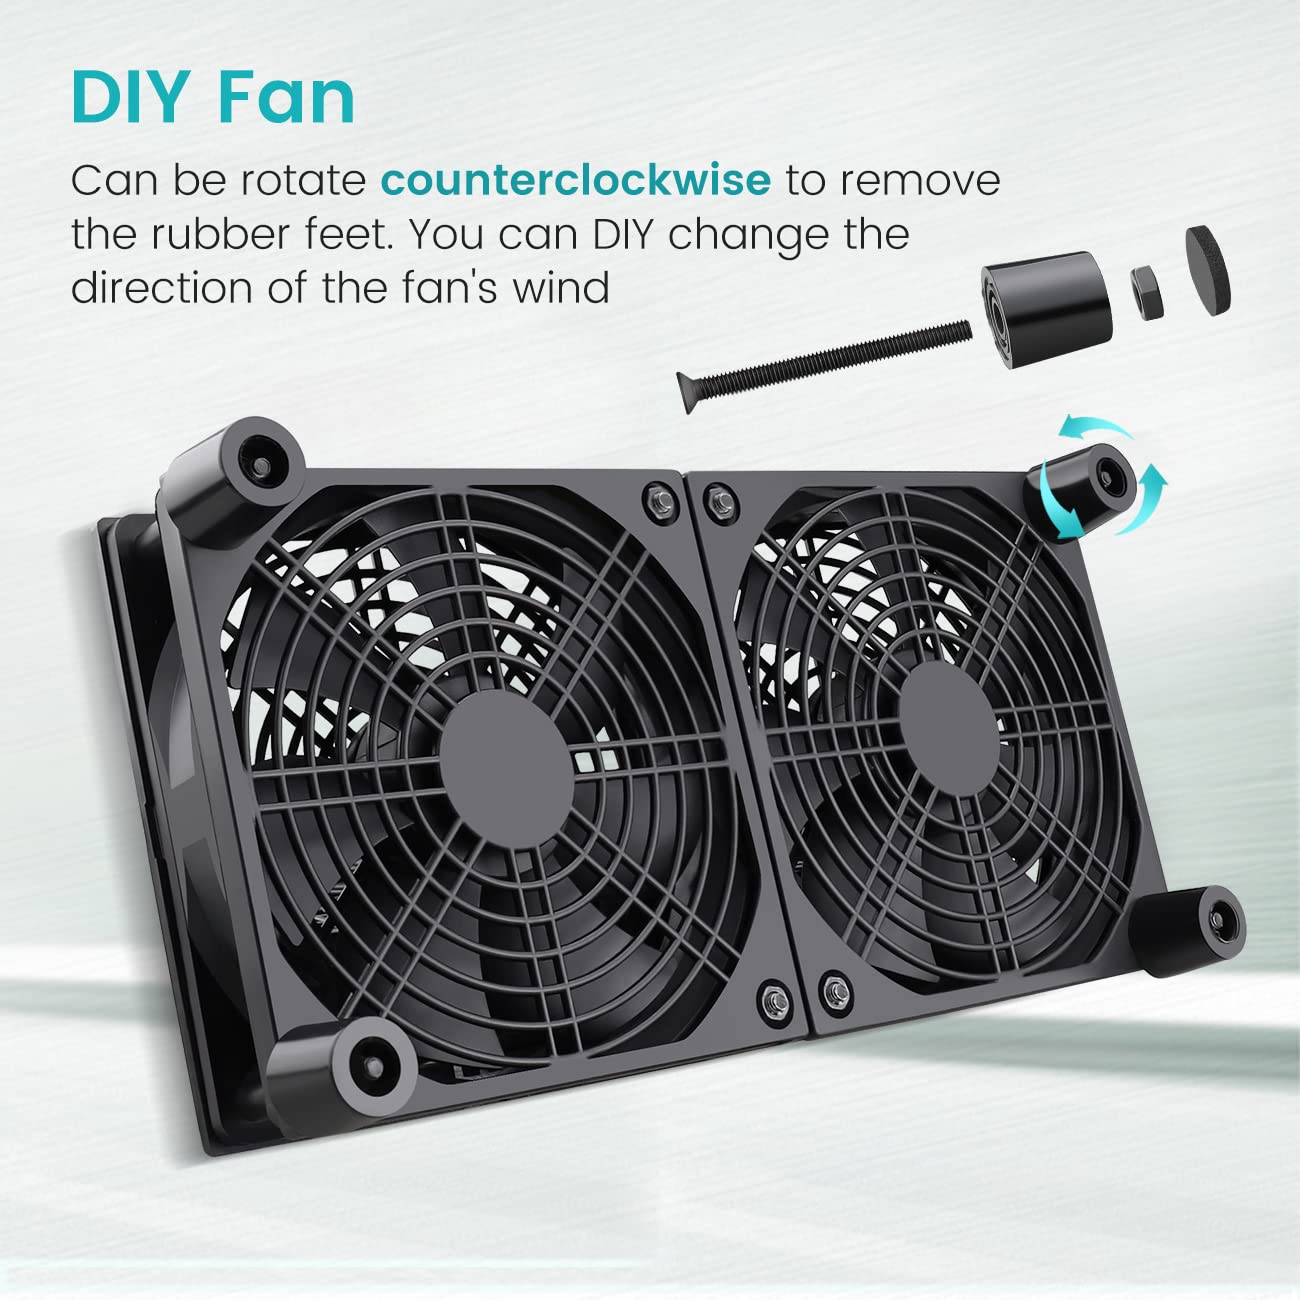 High Airflow Router Cooling Fan for Computer Cooler TV Box Wireless DC 5V USB Power 120Mm 240Mm Fan with Multi Speed Controller